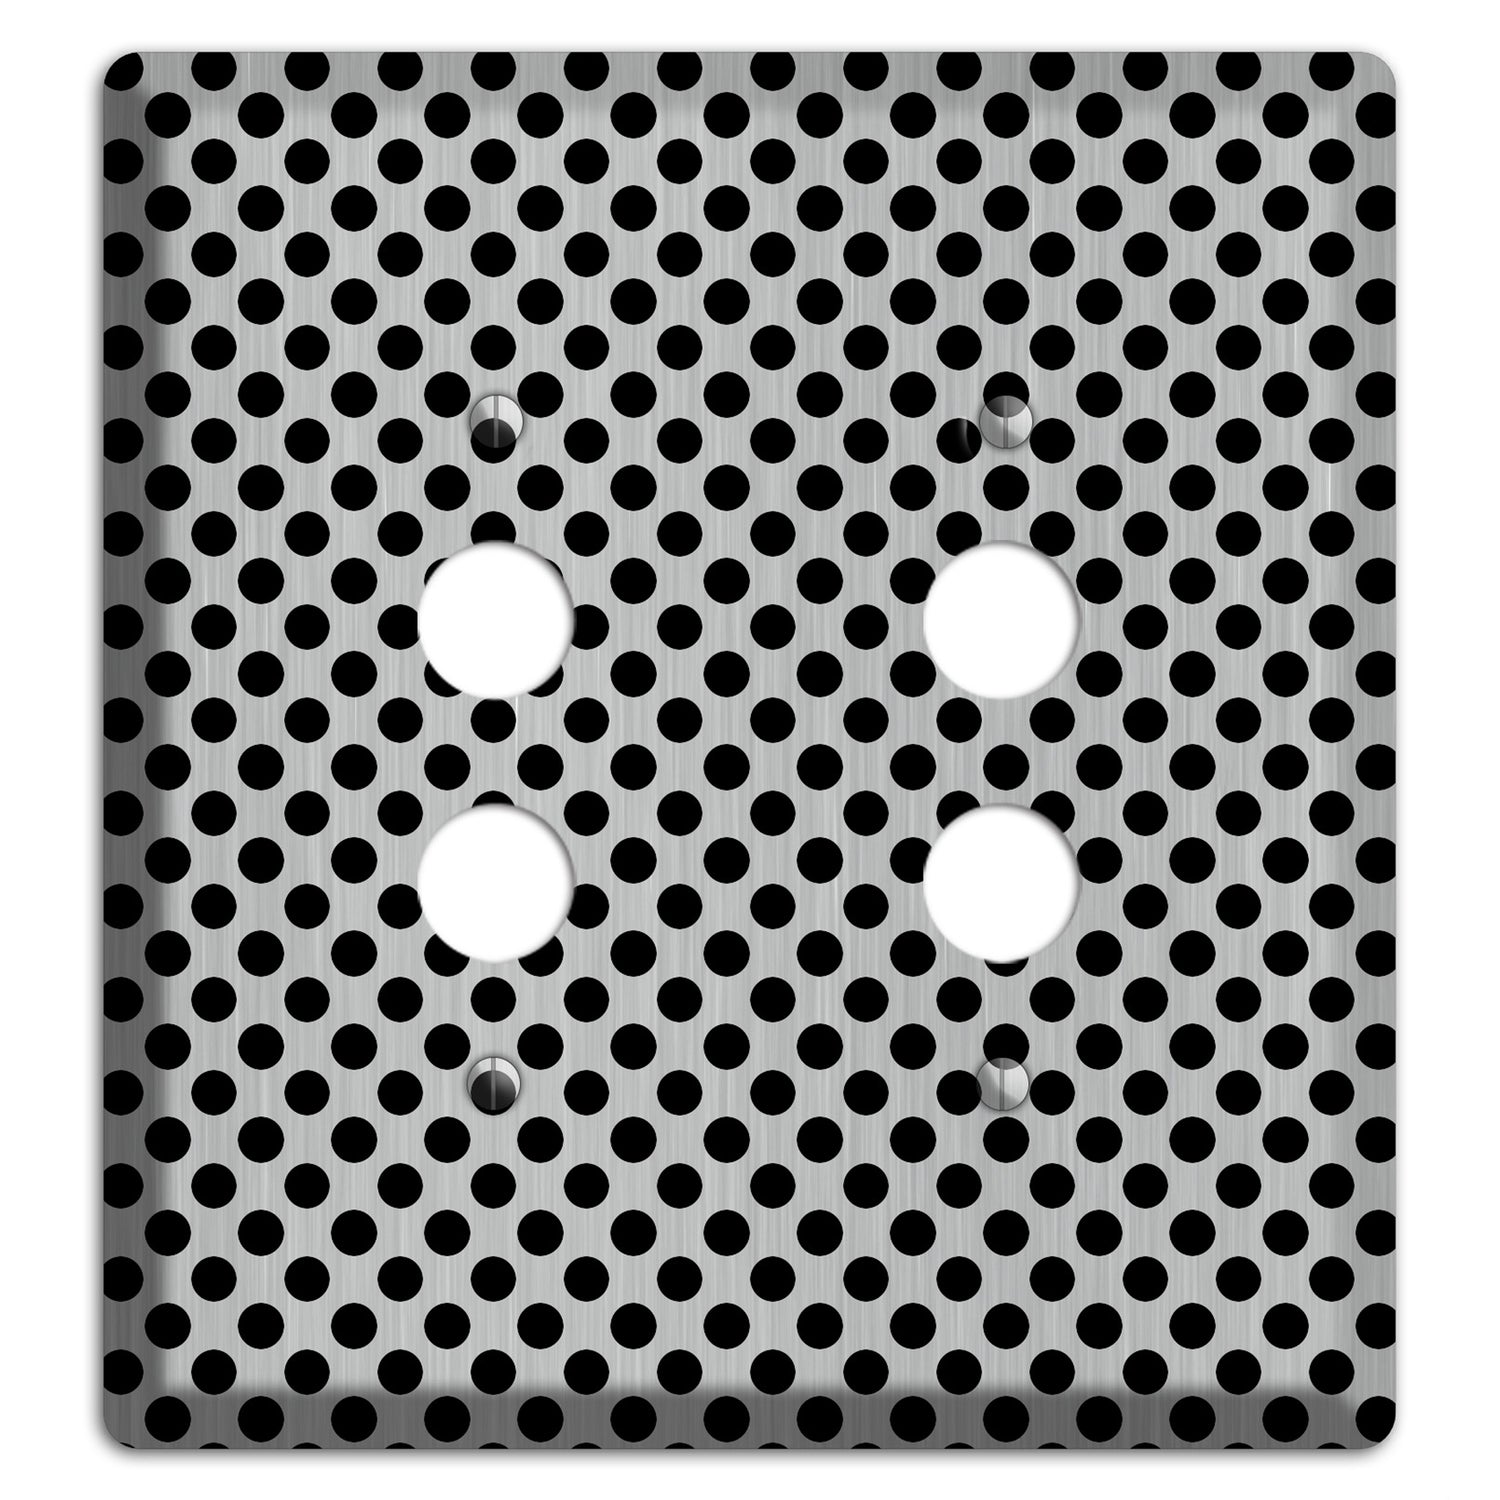 Packed Small Polka Dots Stainless 2 Pushbutton Wallplate